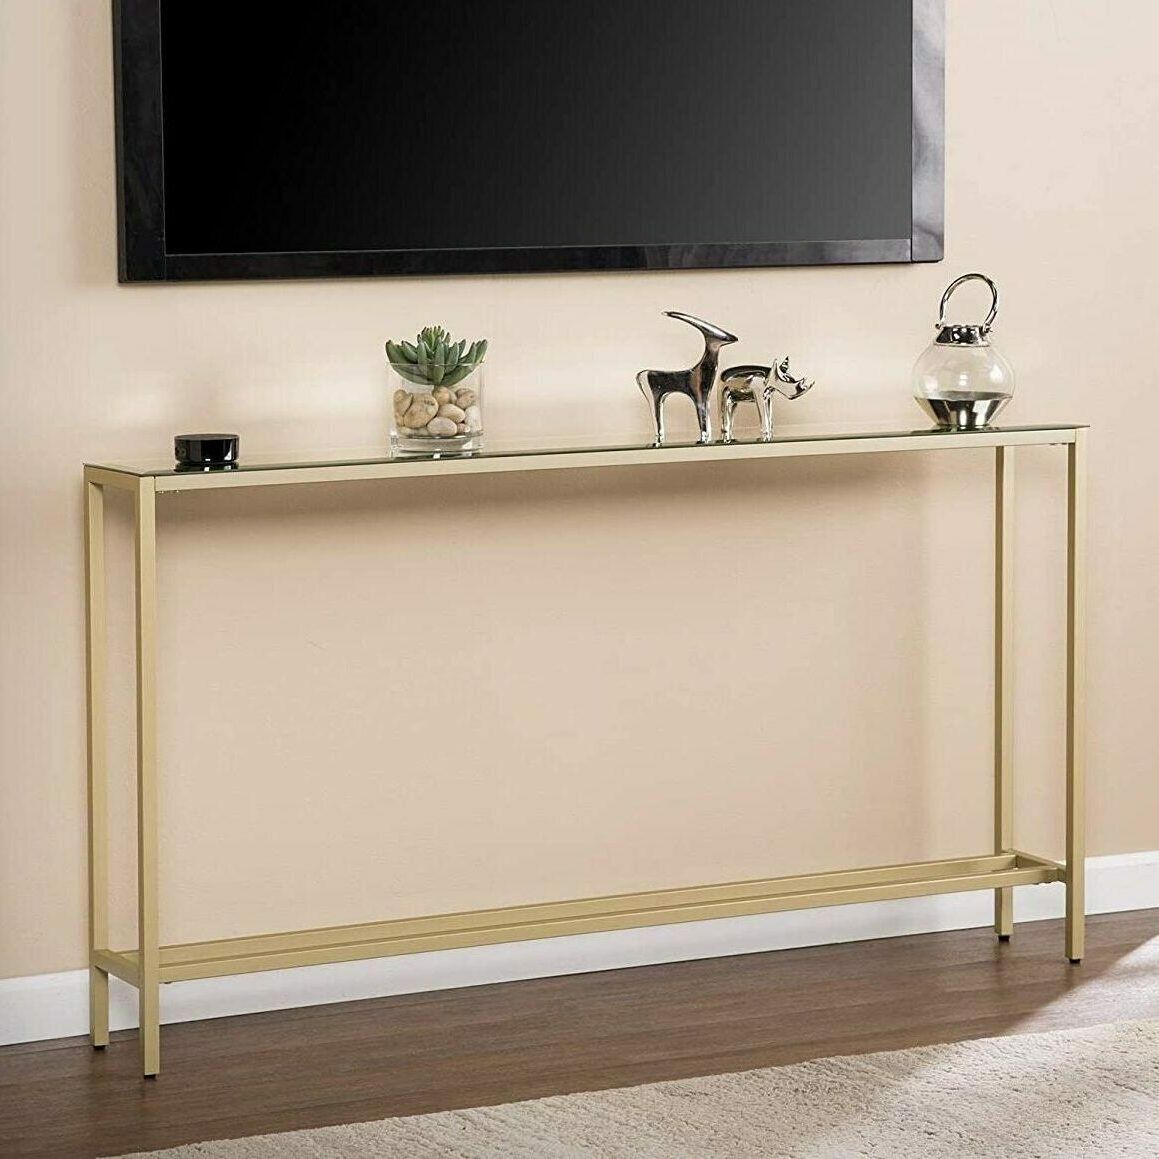 55" Slim Console Table Gold Mirror Top Glam Regarding Preferred Metallic Gold Console Tables (View 5 of 10)